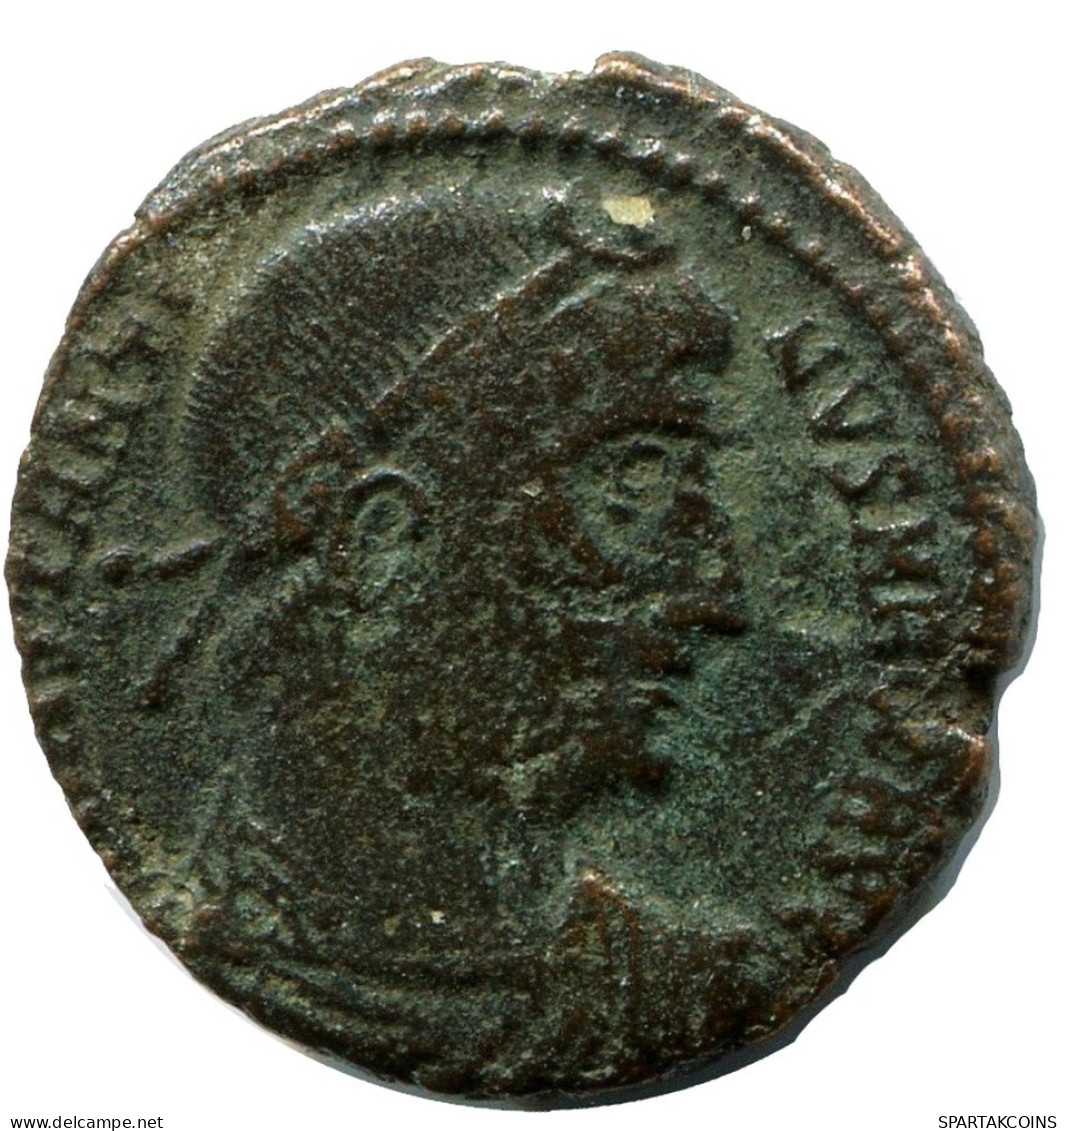 CONSTANTINE I MINTED IN HERACLEA FOUND IN IHNASYAH HOARD EGYPT #ANC11190.14.E.A - The Christian Empire (307 AD Tot 363 AD)